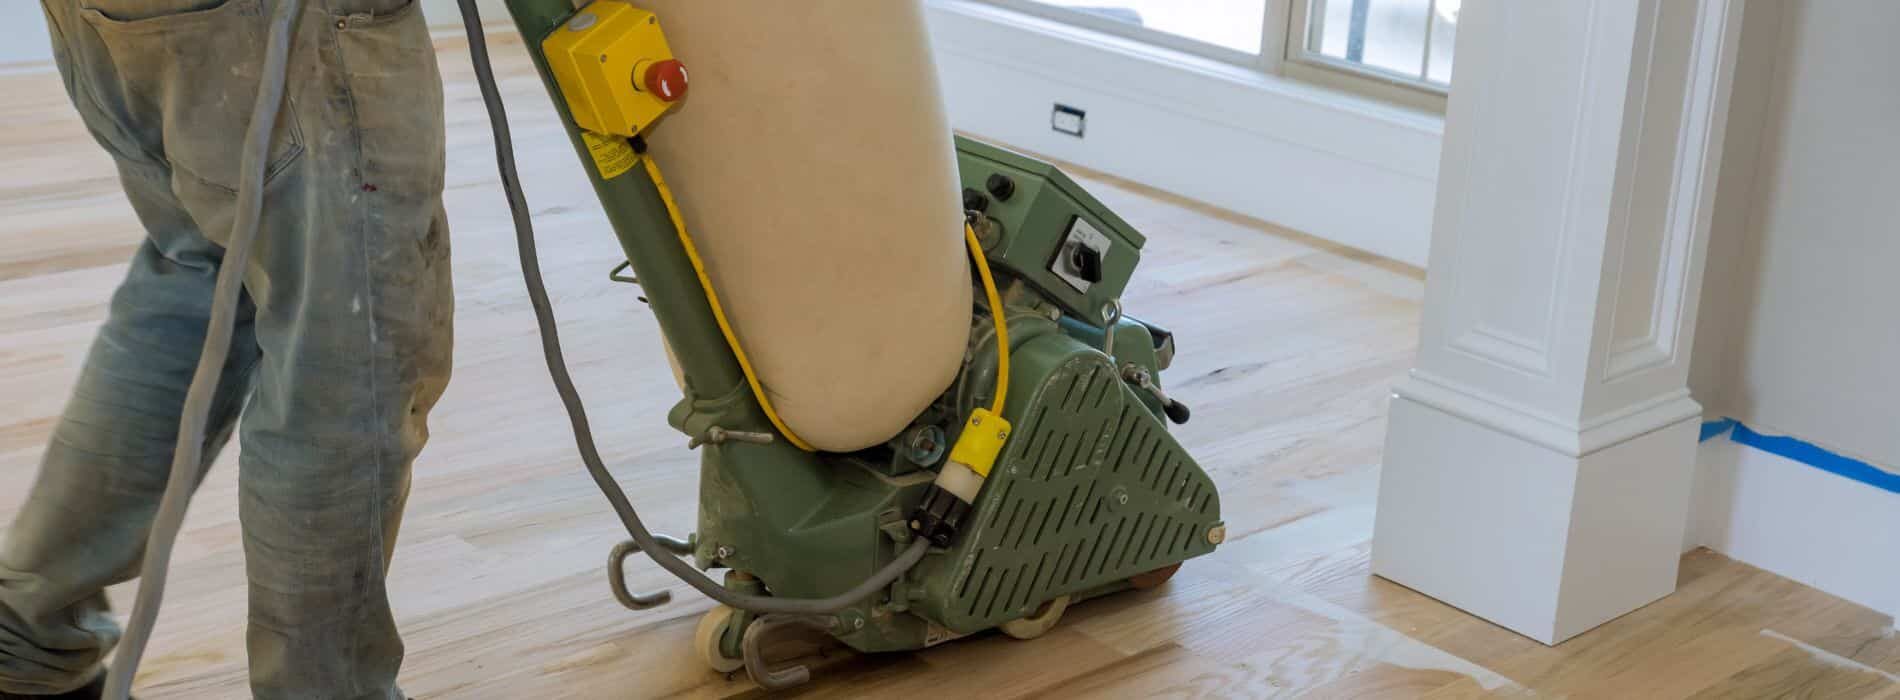 In Hornchurch, RM12, Mr Sander® using the Bona Scorpion drum sander, a versatile 1.5kW sanding tool, for effective sanding of herringbone floors. The innovative technique includes a HEPA-filtered dust extraction system, ensuring a clean and efficient restoration process.